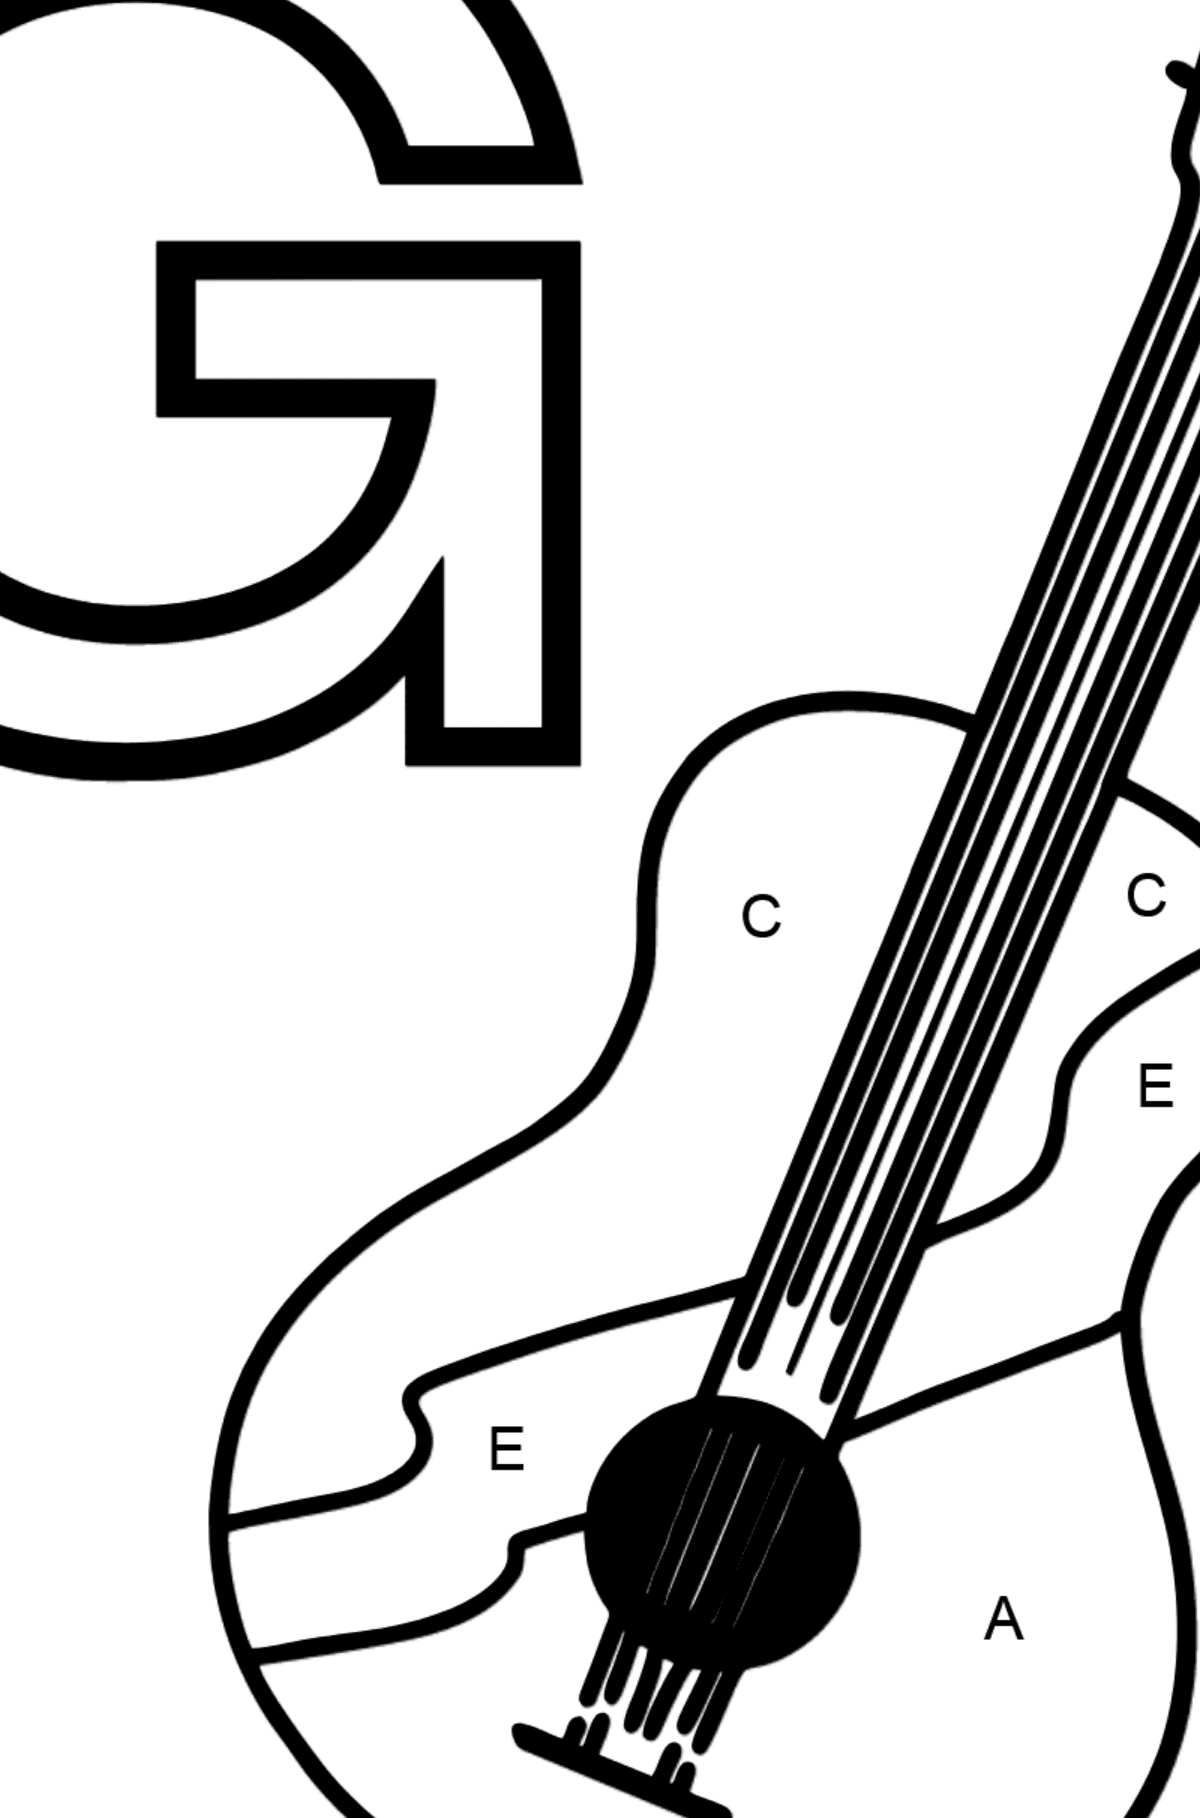 Spanish Letter G coloring pages - GUITARRA - Coloring by Letters for Kids